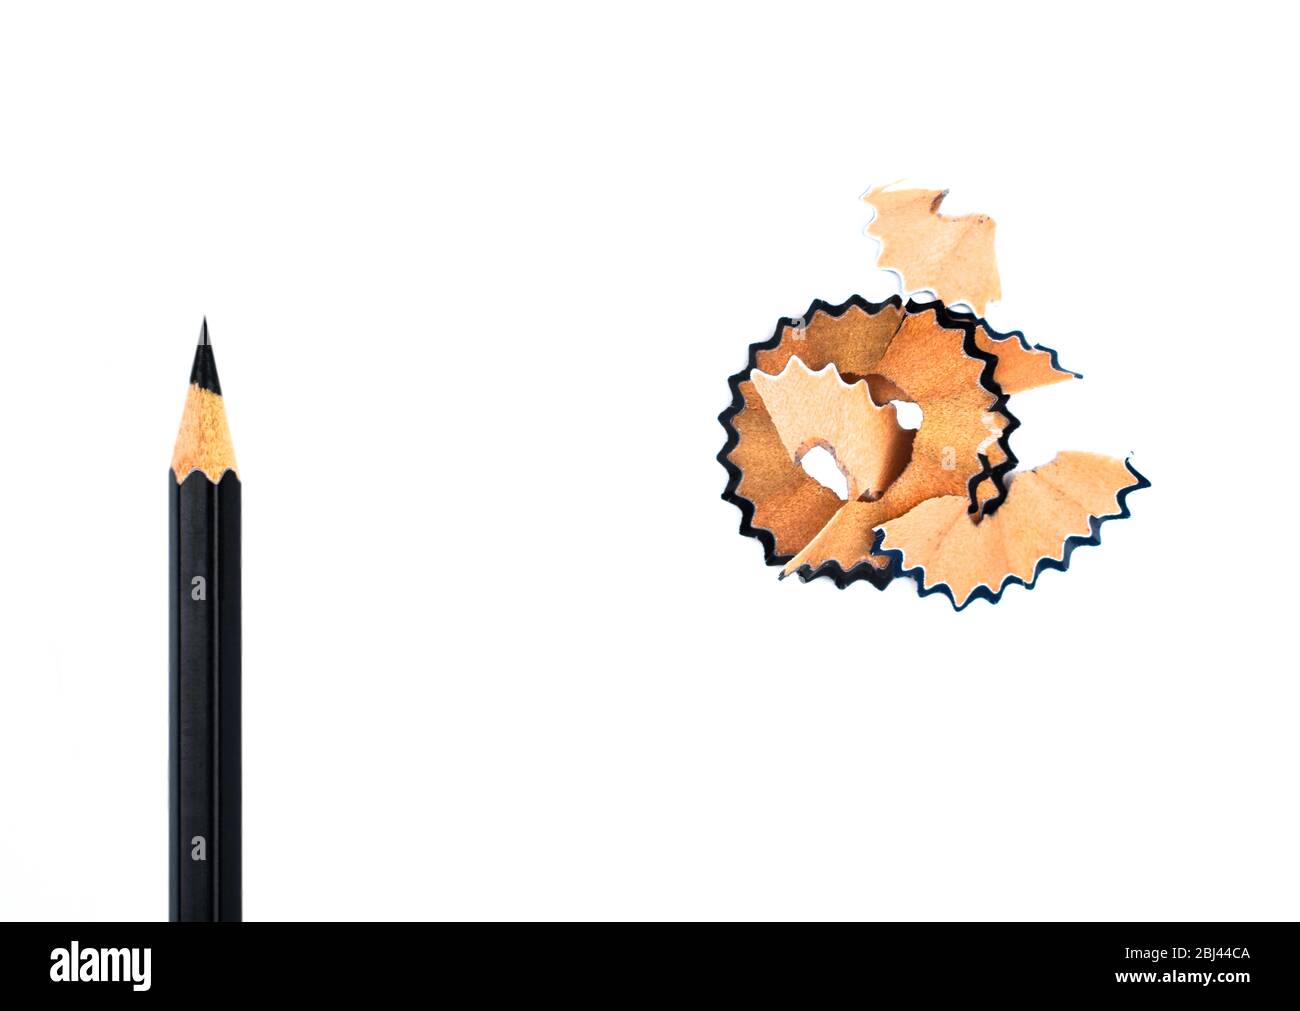 Top view of some pencil shavings placed beside a black color wood pencil crayon Stock Photo